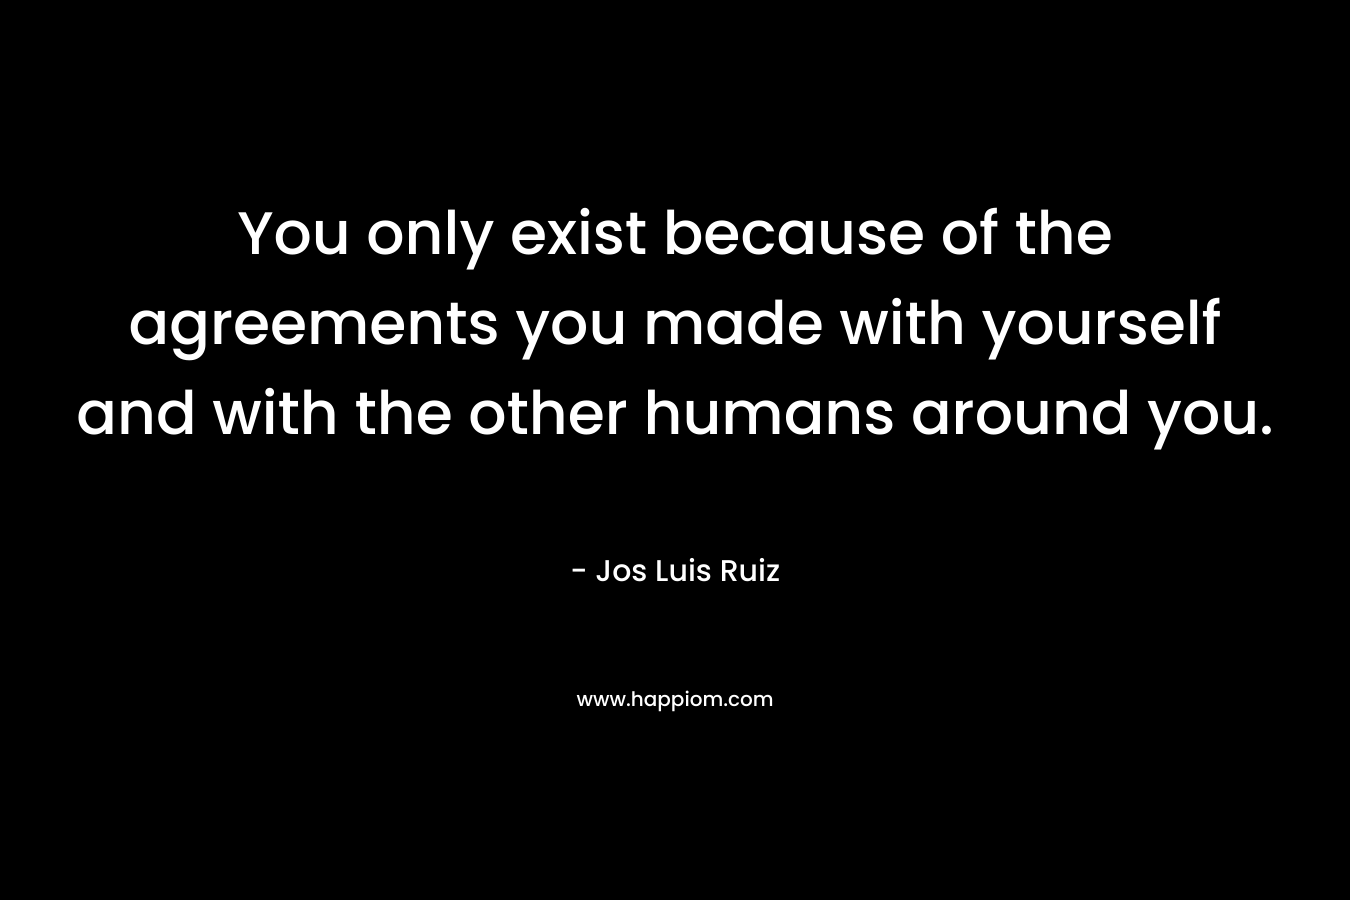 You only exist because of the agreements you made with yourself and with the other humans around you. – Jos Luis Ruiz